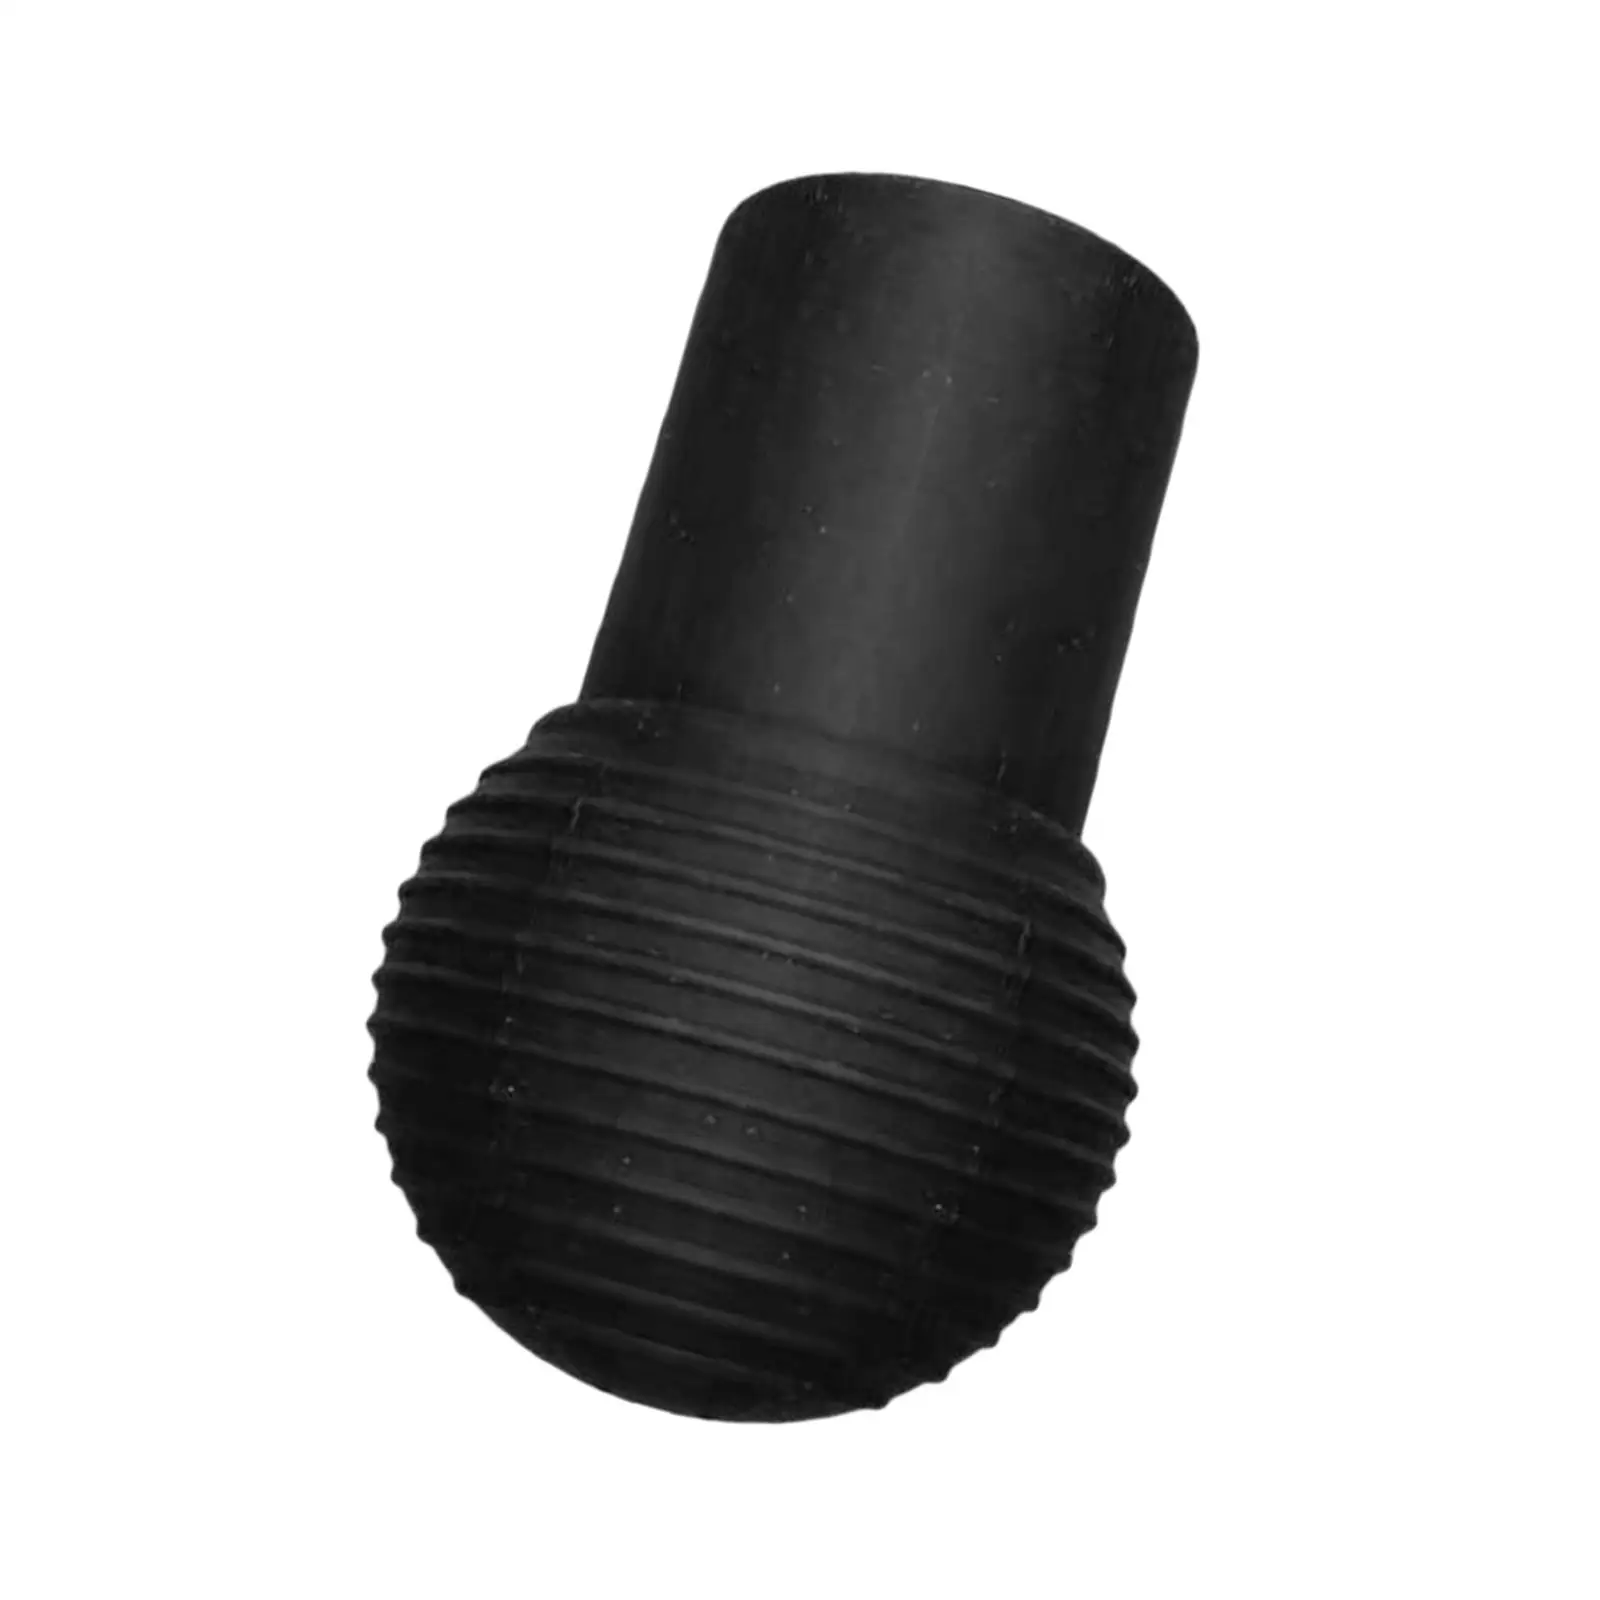 Barbell Landmine Holder 2 inch Ball Base Silicone Black Barbell Floor Swivel for Split Squats Presses Rows Rotation Home Gym